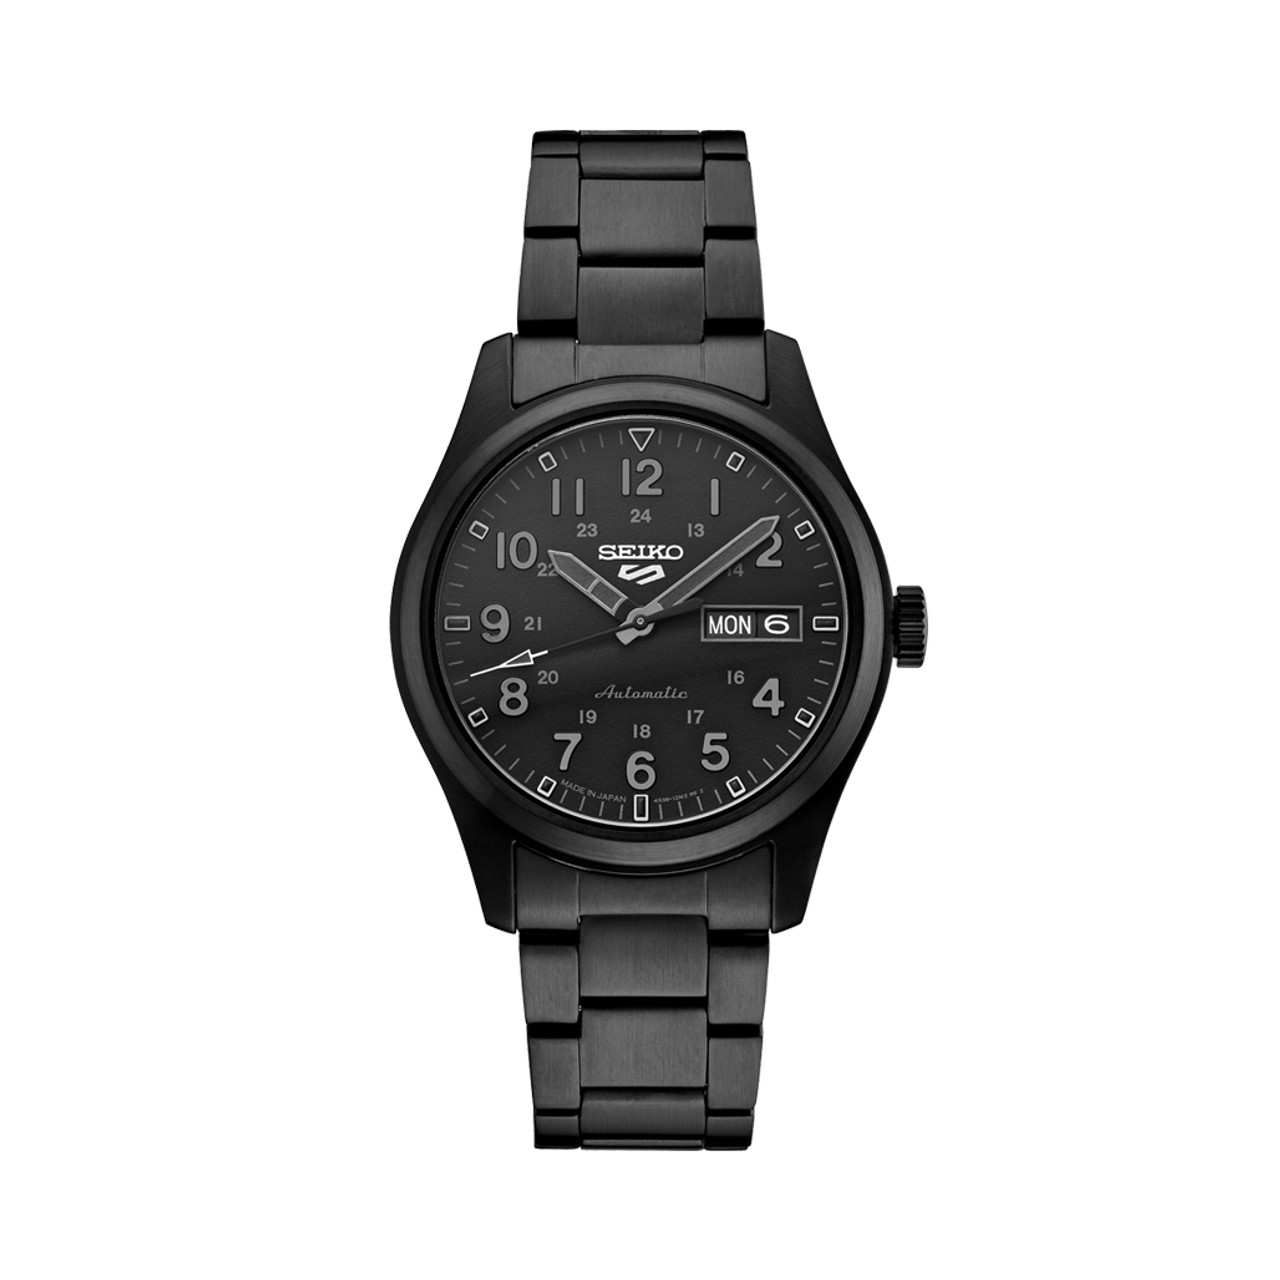 Seiko 5 Sports Watch in Stealth Black on